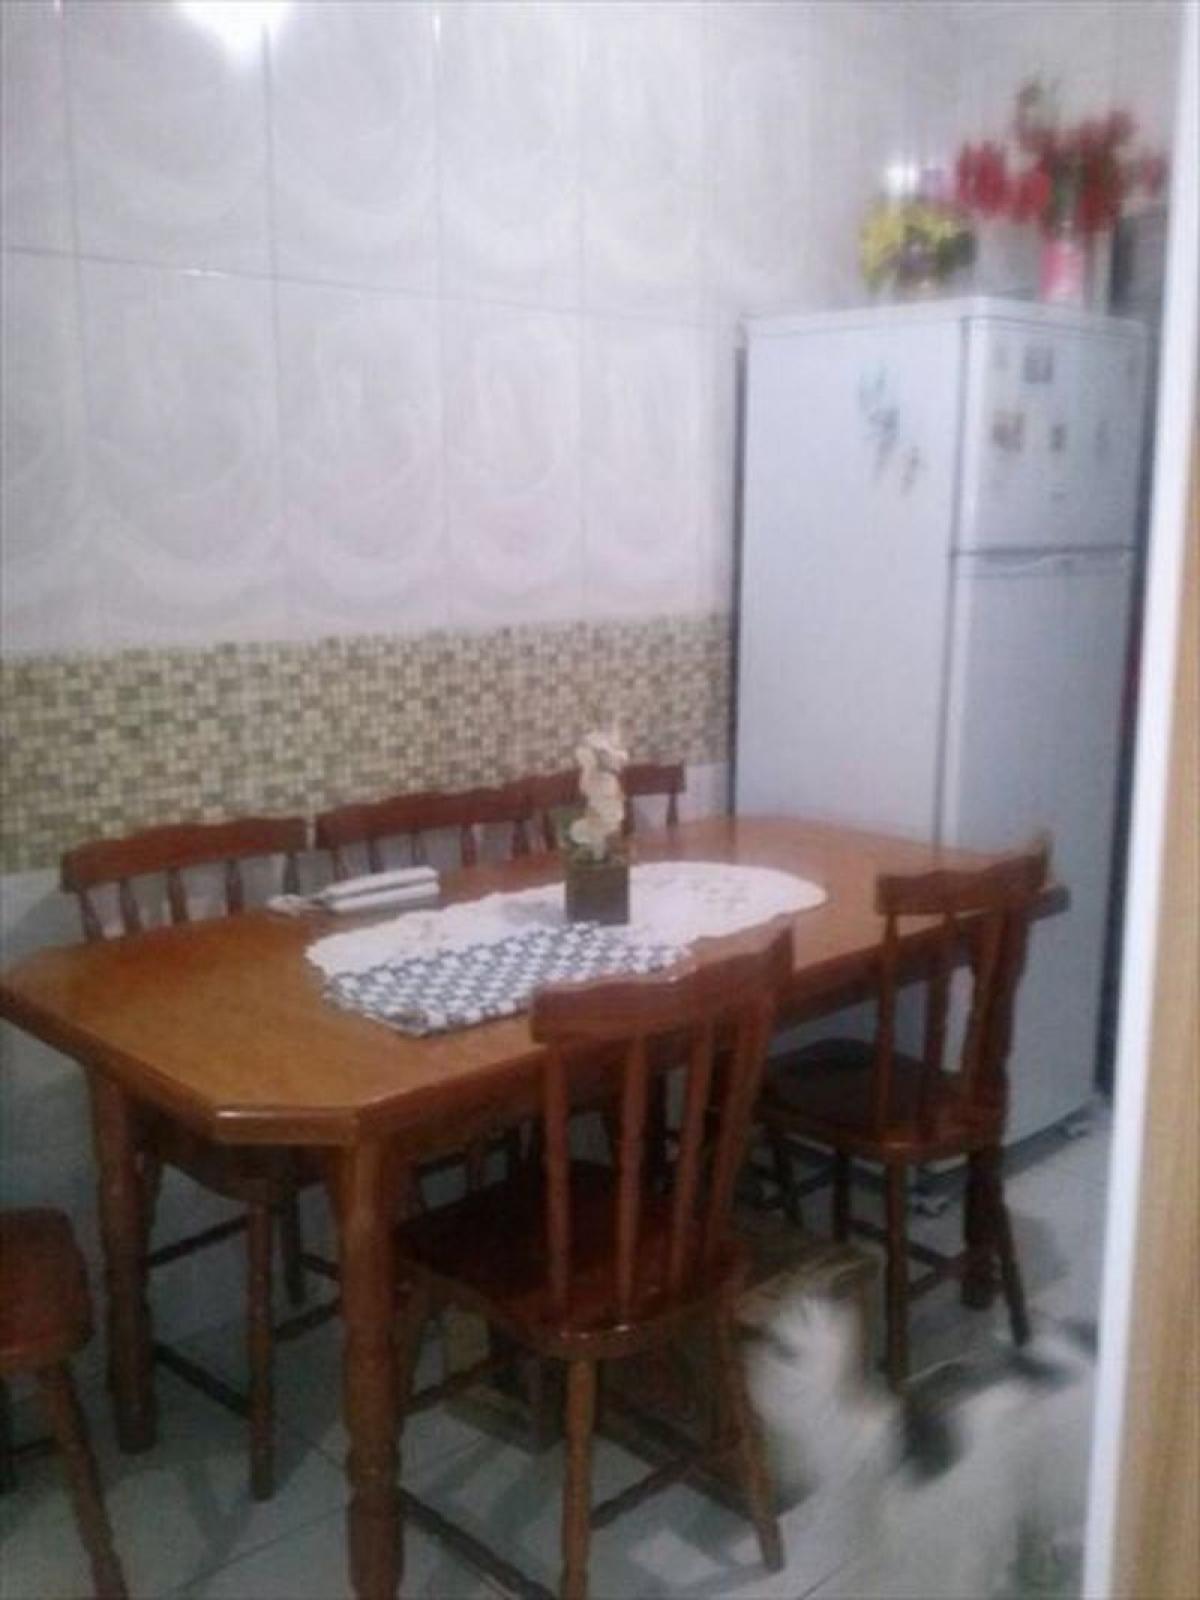 Picture of Townhome For Sale in Guarulhos, Sao Paulo, Brazil